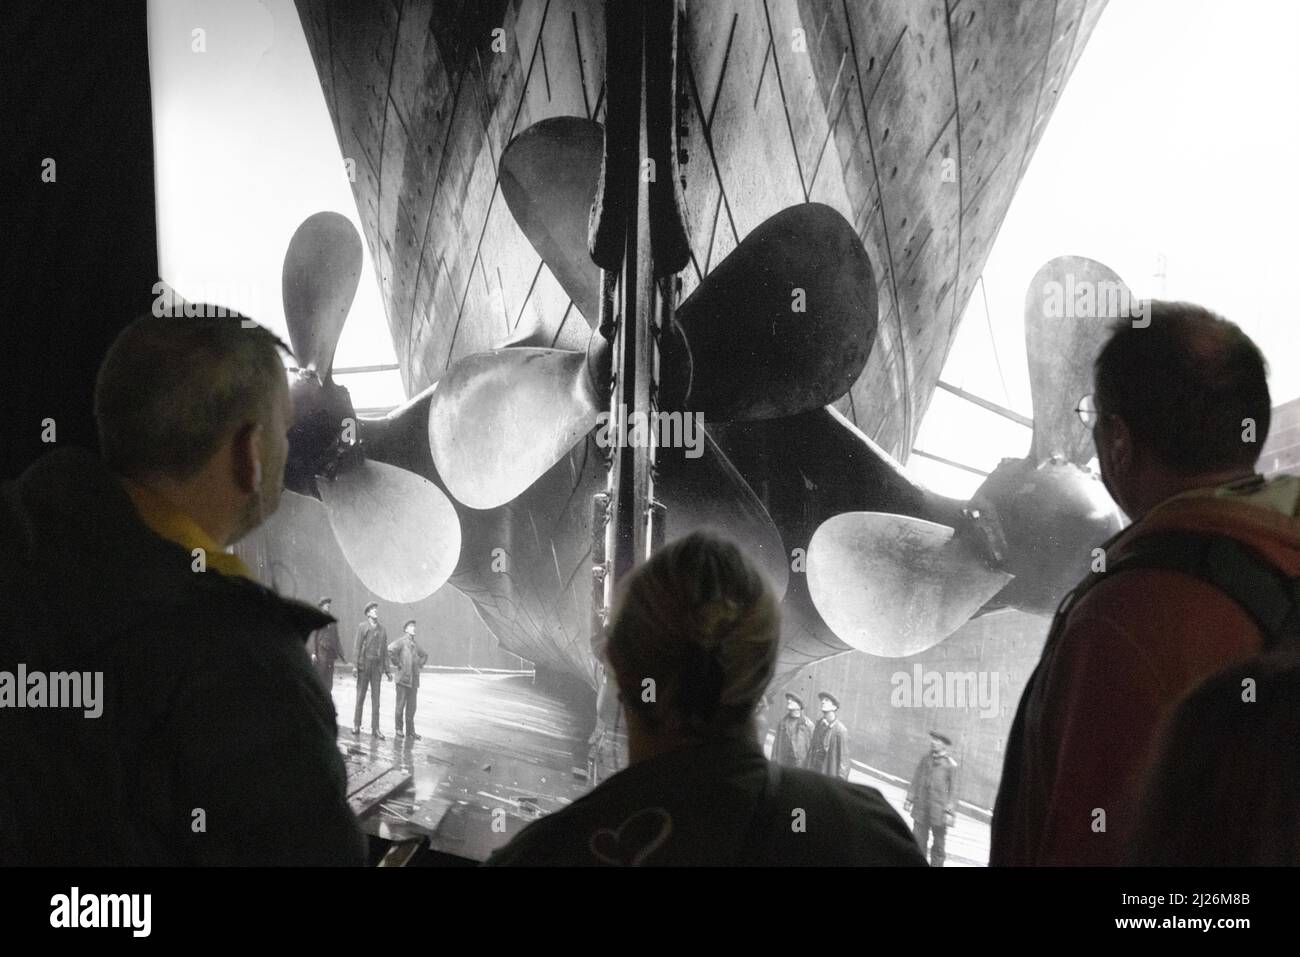 The Titanic Exhibition - visitors looking at a photograph of the Titanic ship propellers, London UK Stock Photo